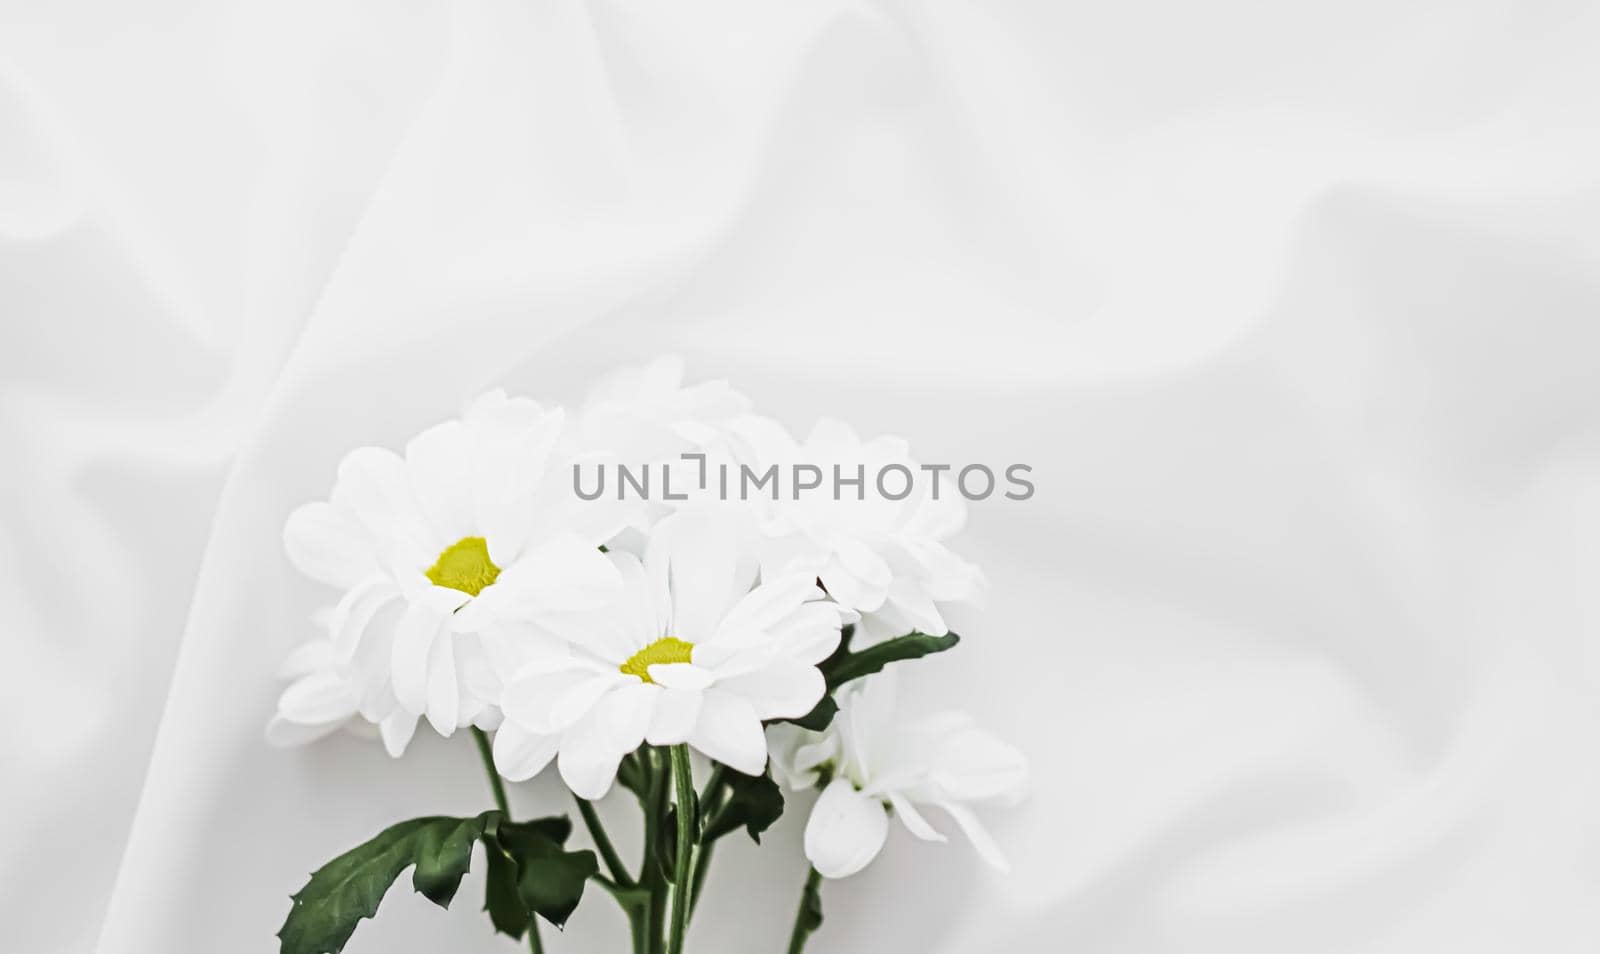 White daisy flowers on silk fabric as bridal flatlay background, wedding invitation and holiday branding, flat lay design concept